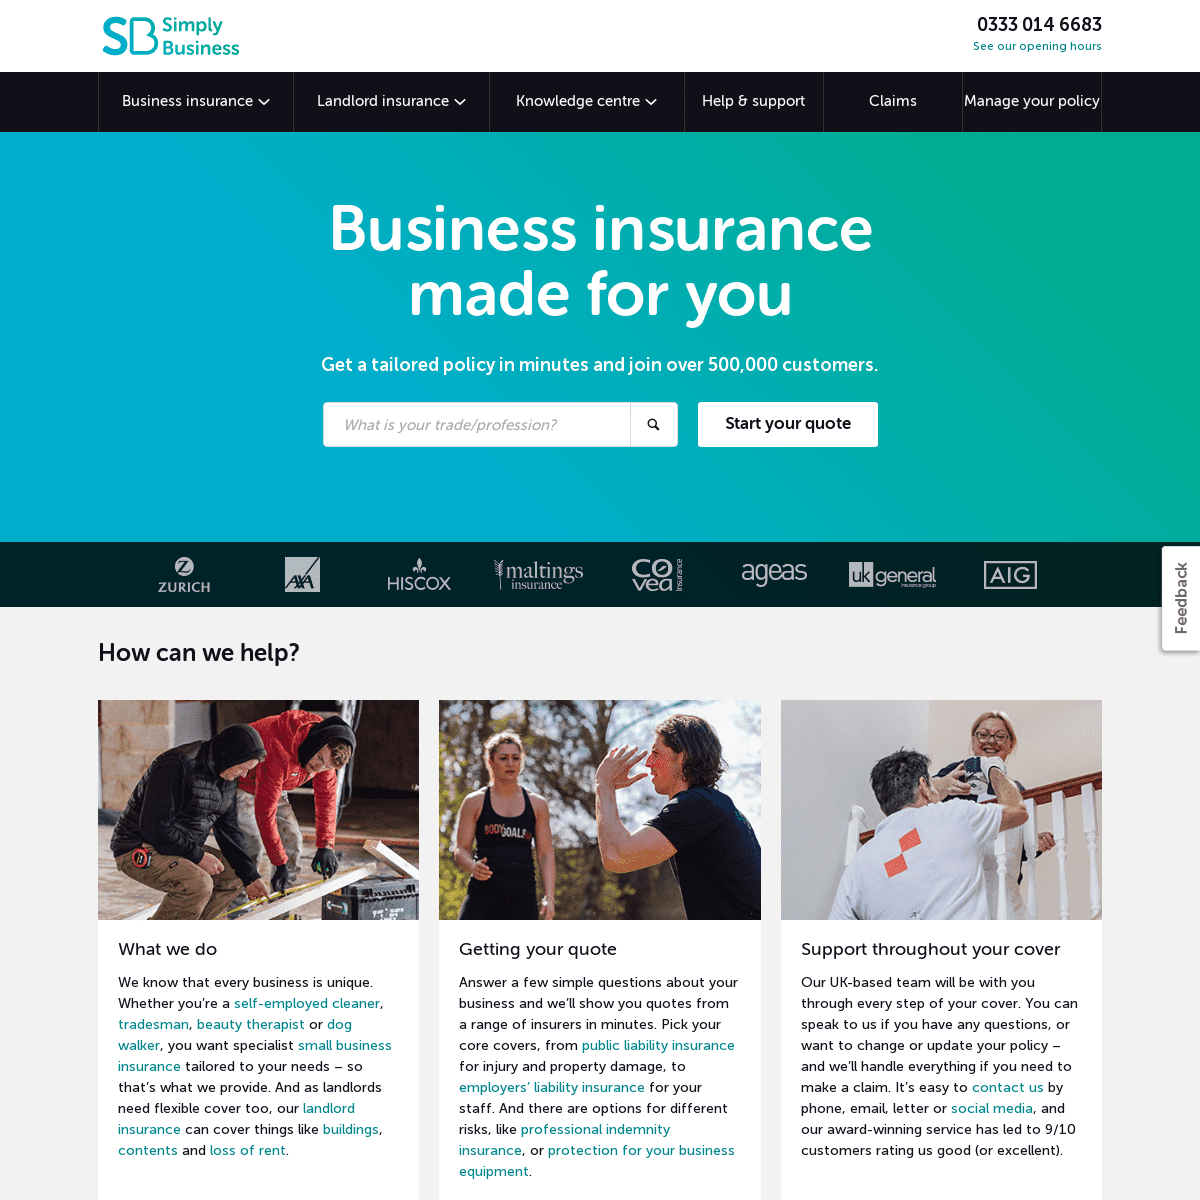 Simply Business - business insurance made for you | public liability, professional indemnity, landlord insurance & more